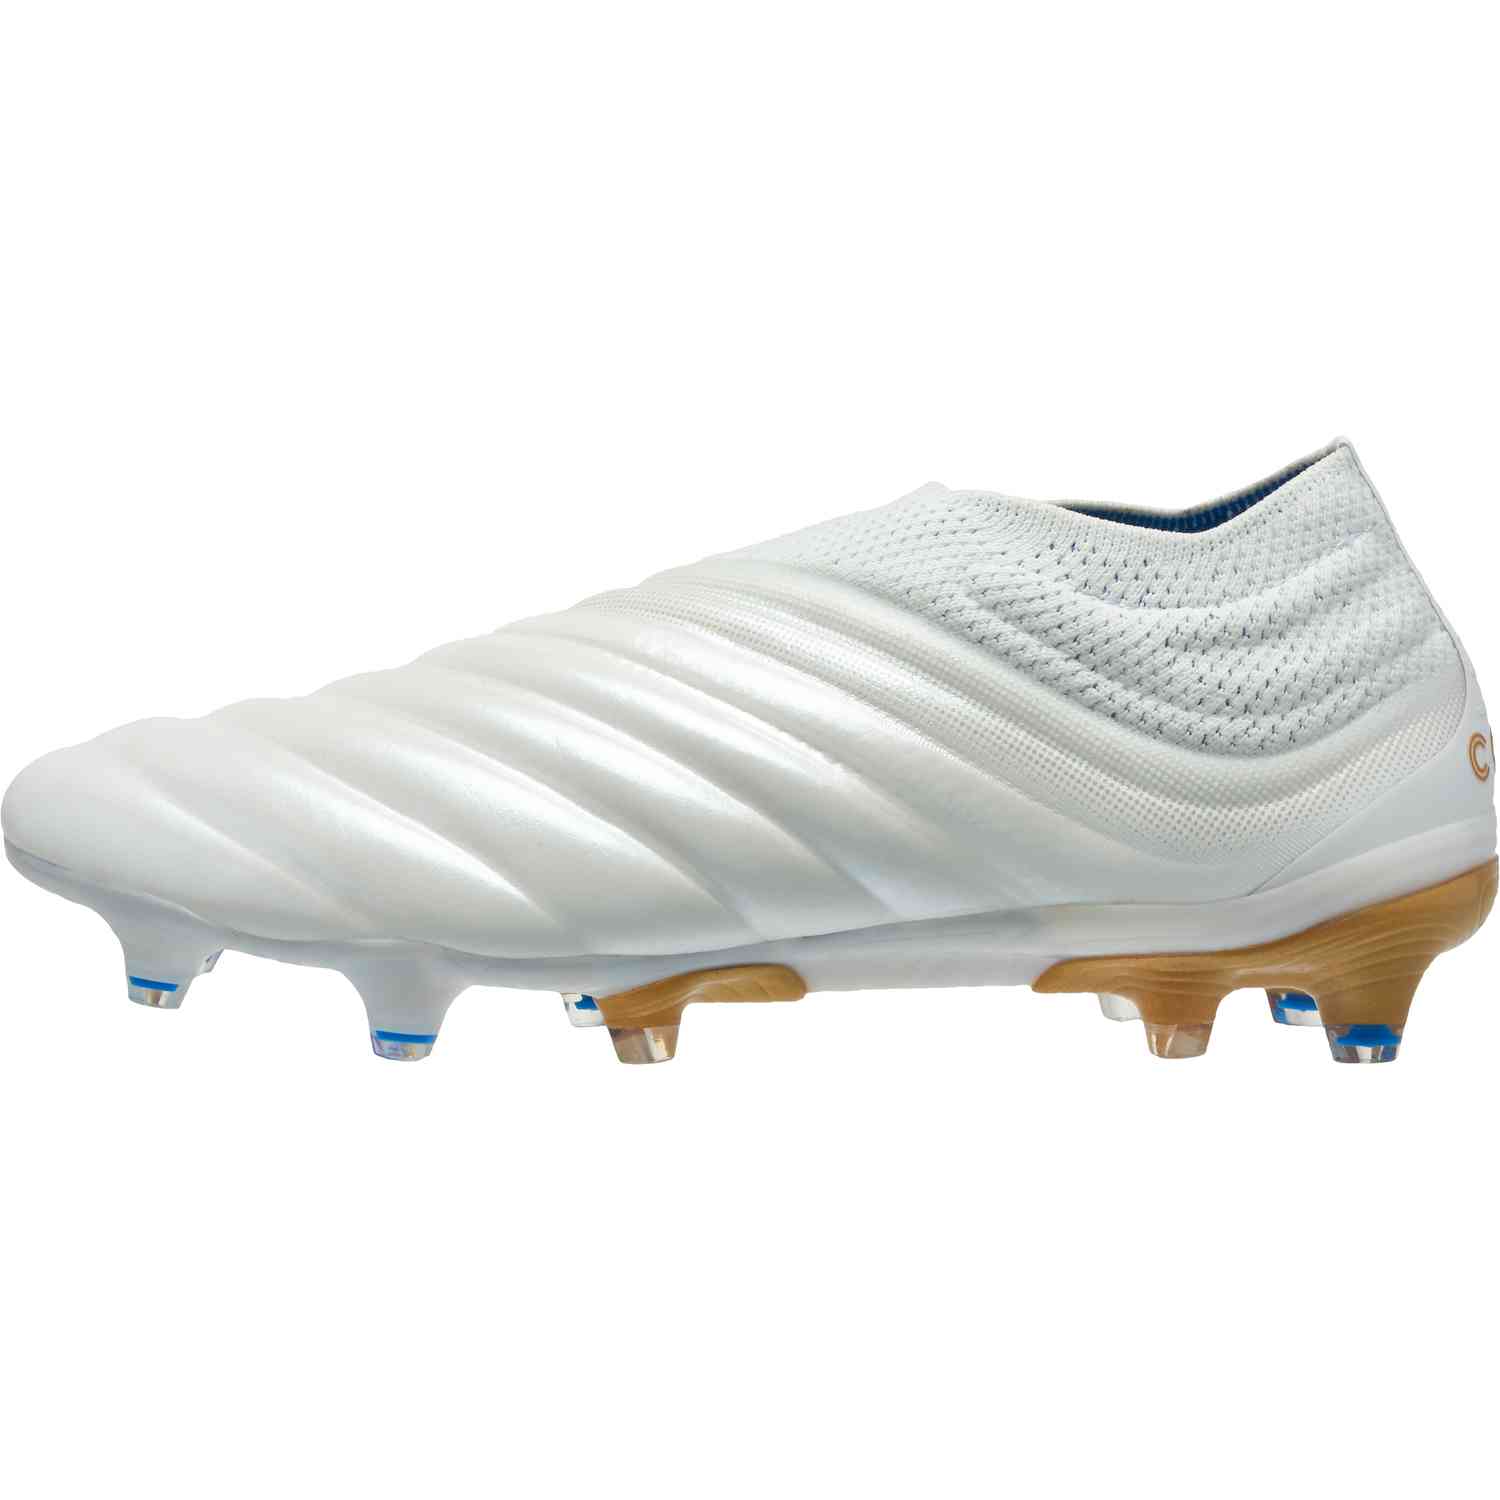 copa 19 white and gold